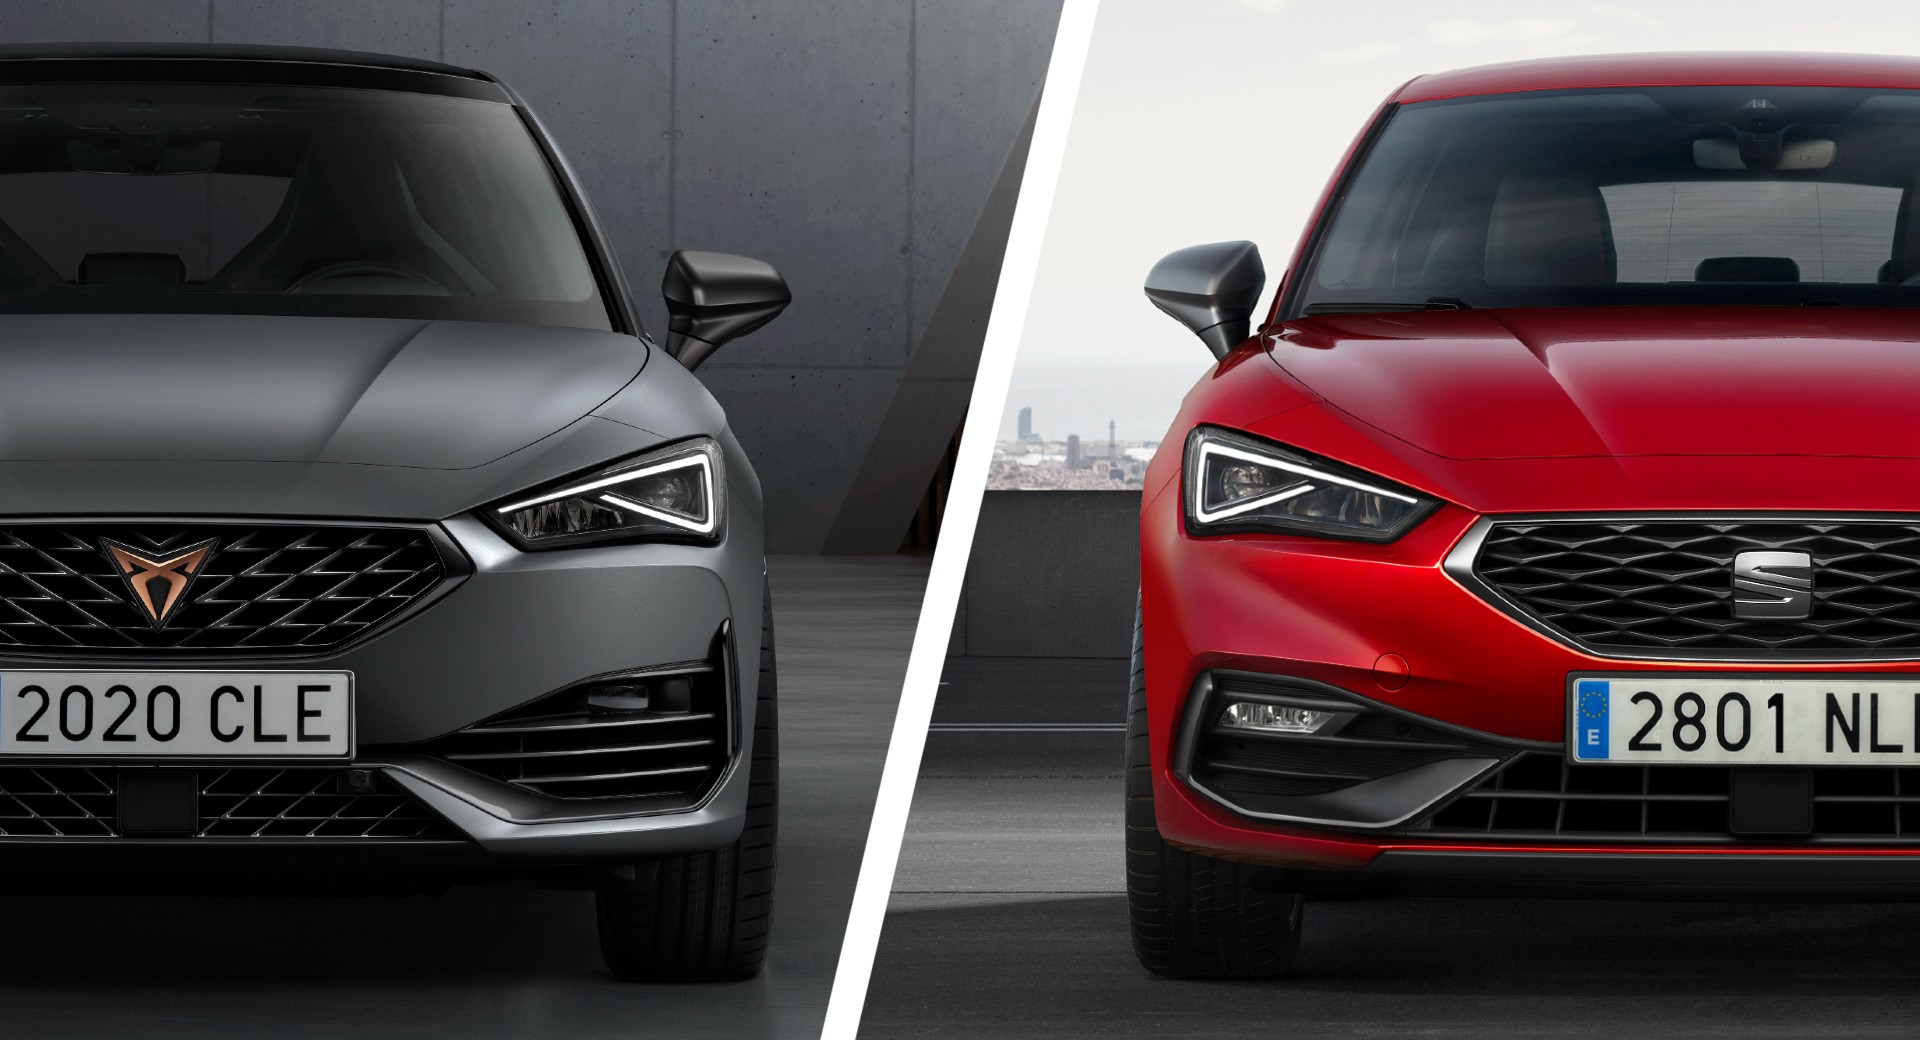 You Can Now Buy The Cupra And The Seat Leon With The Same 1.5L Or